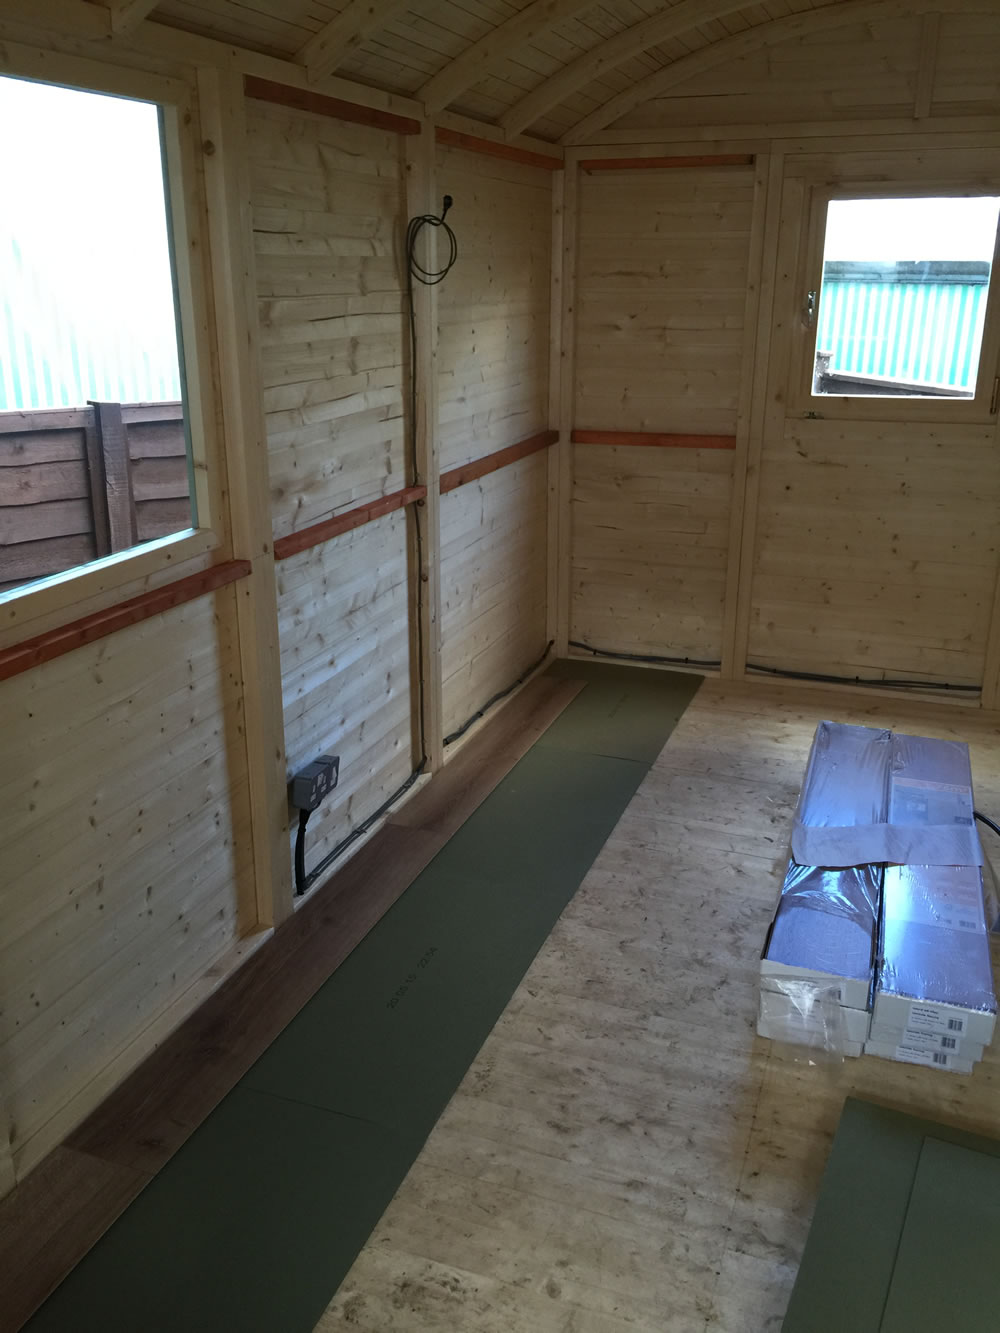 Additional battens in the walls and laminate flooring is installed. An electrical circuit is also now in place.